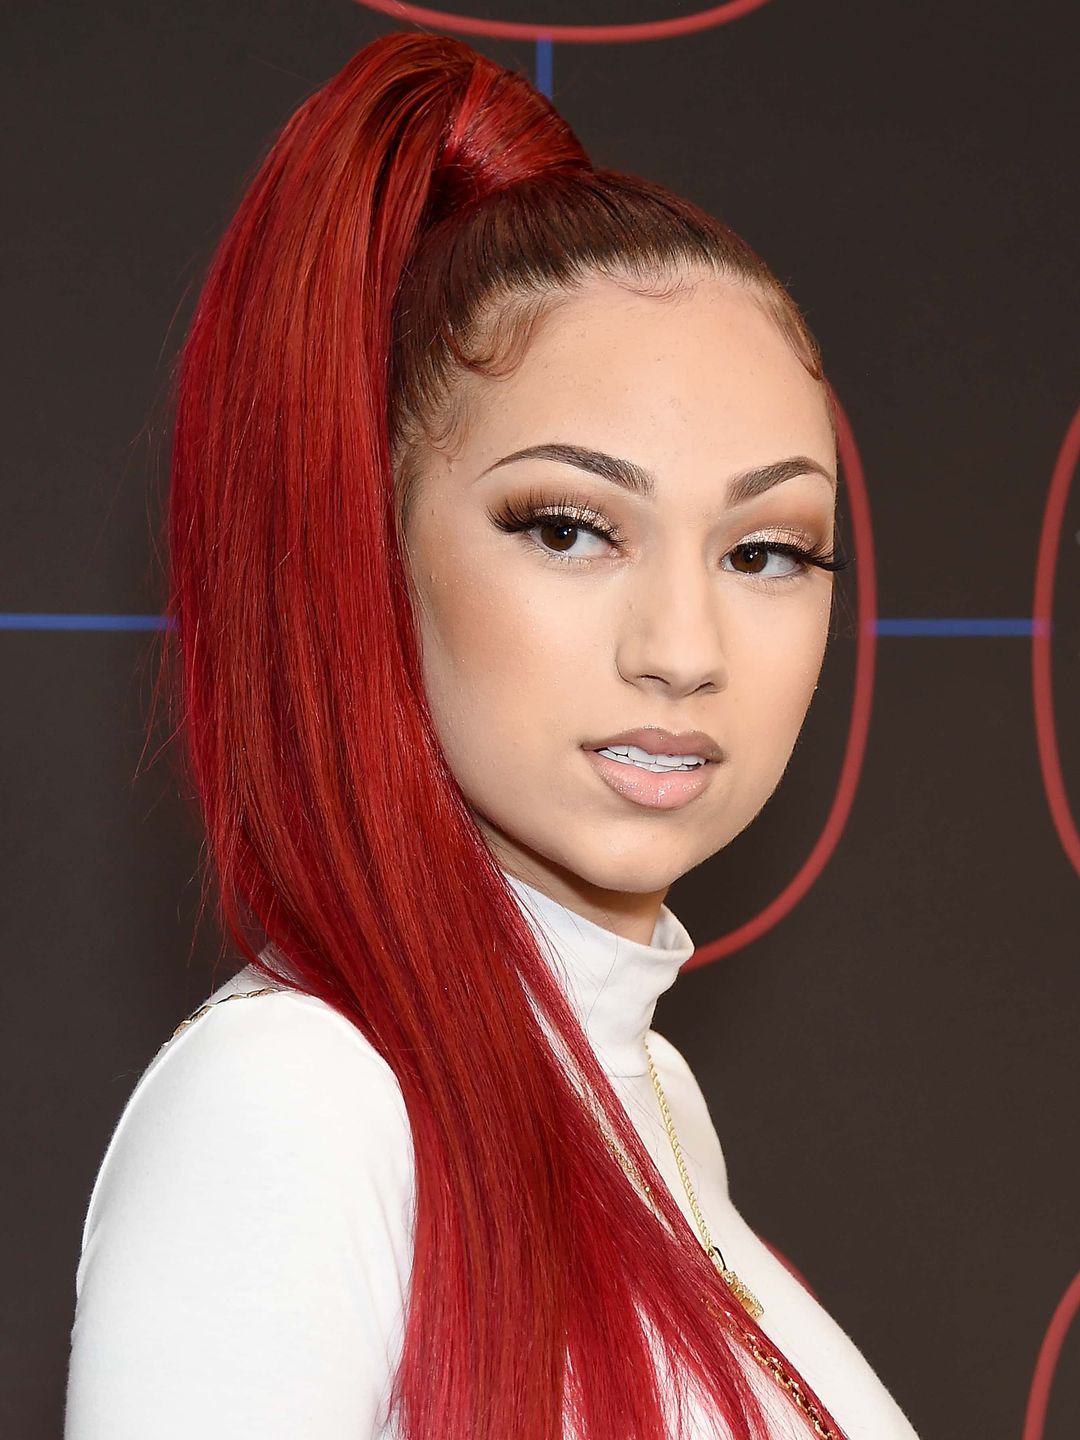 Bhad Bhabie who are her parents